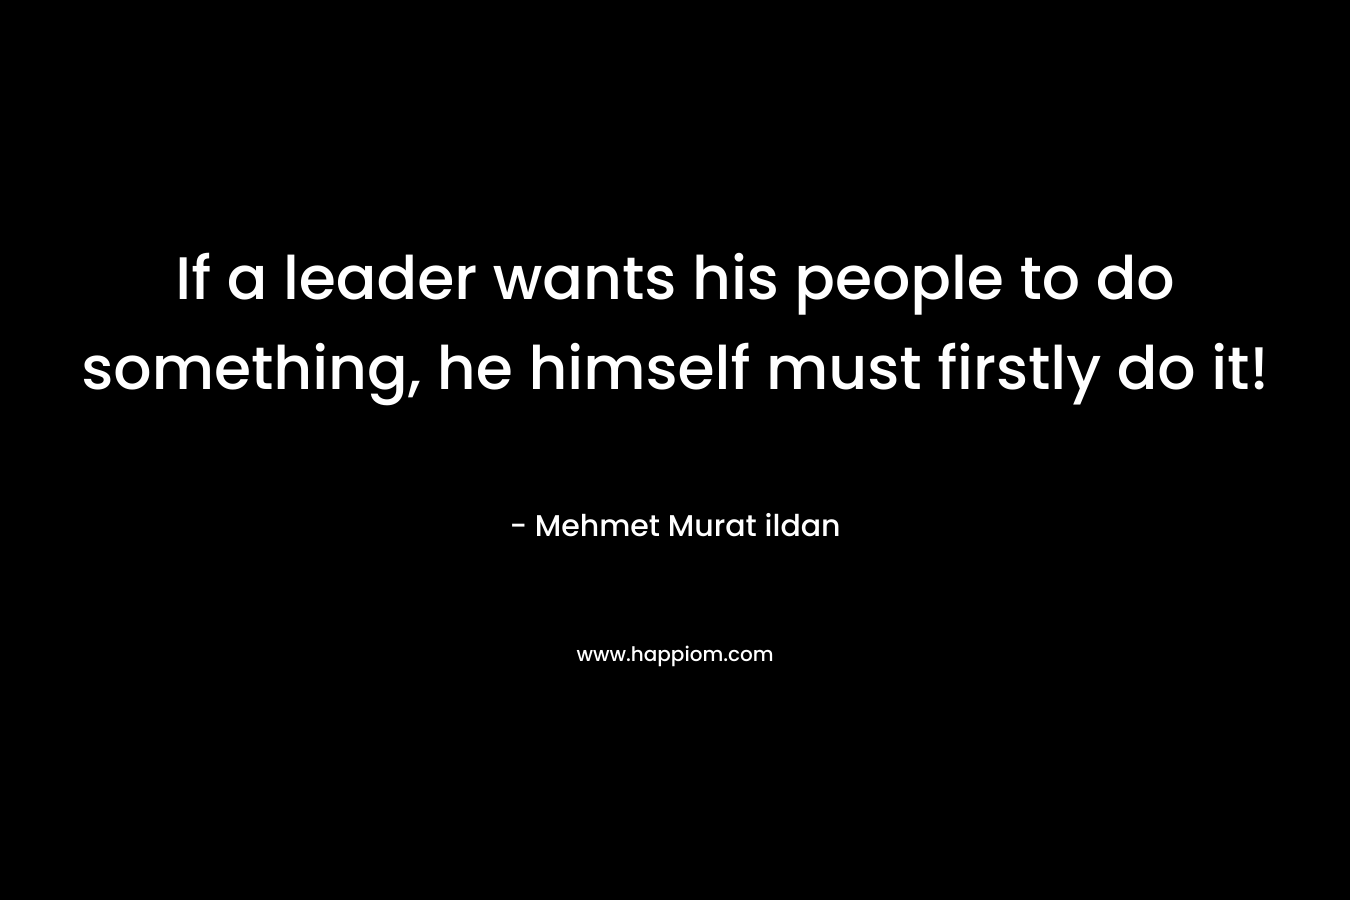 If a leader wants his people to do something, he himself must firstly do it!